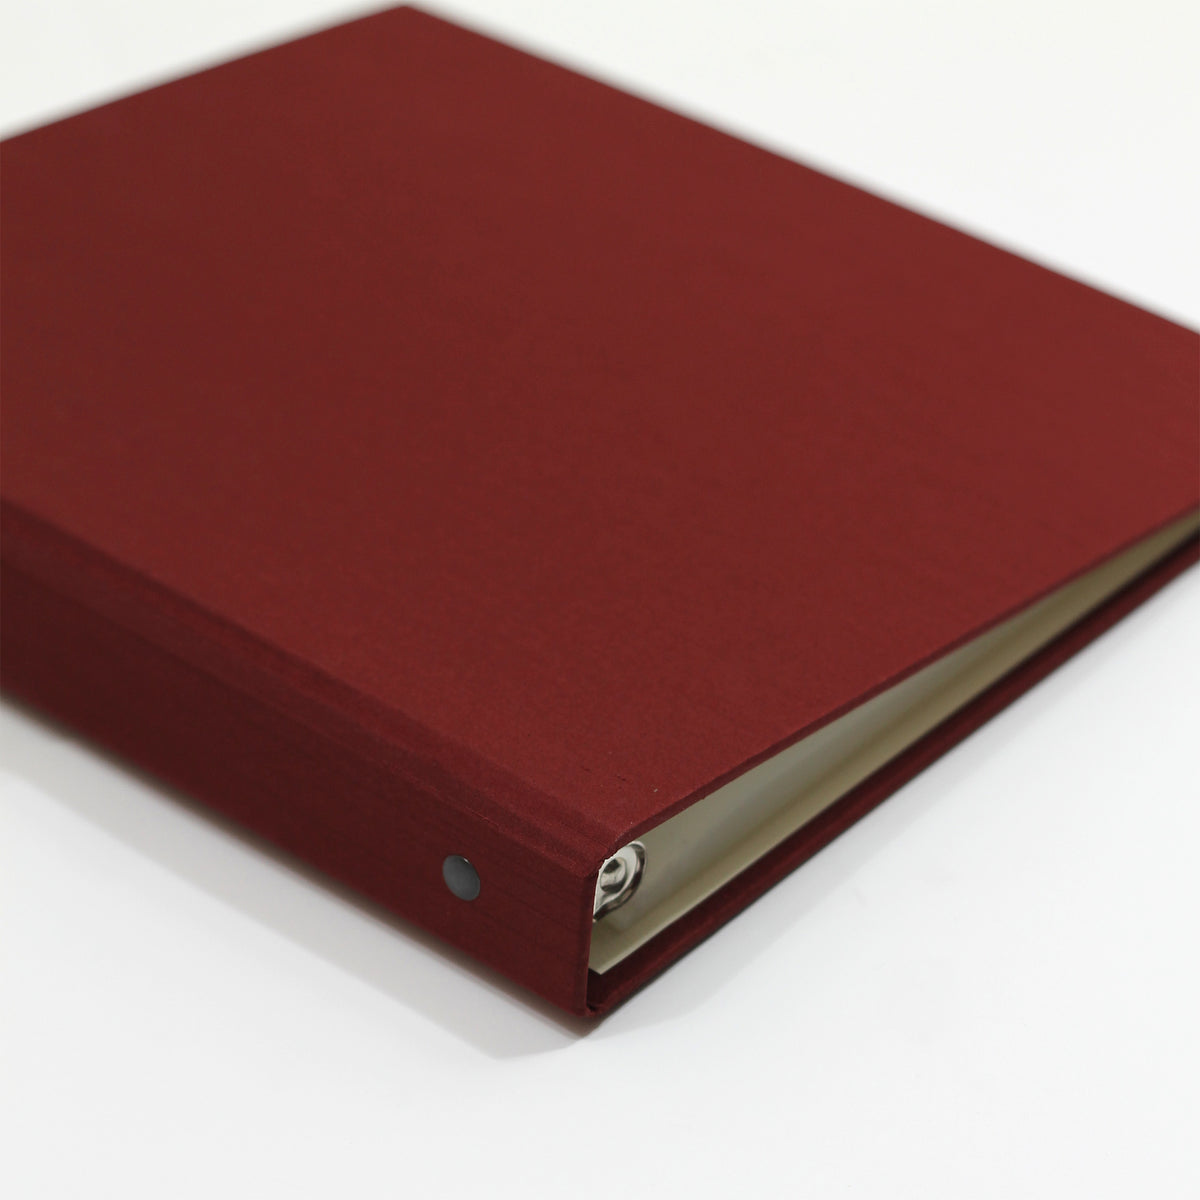 Storage Binder for Photos or Documents with Garnet Silk Cover